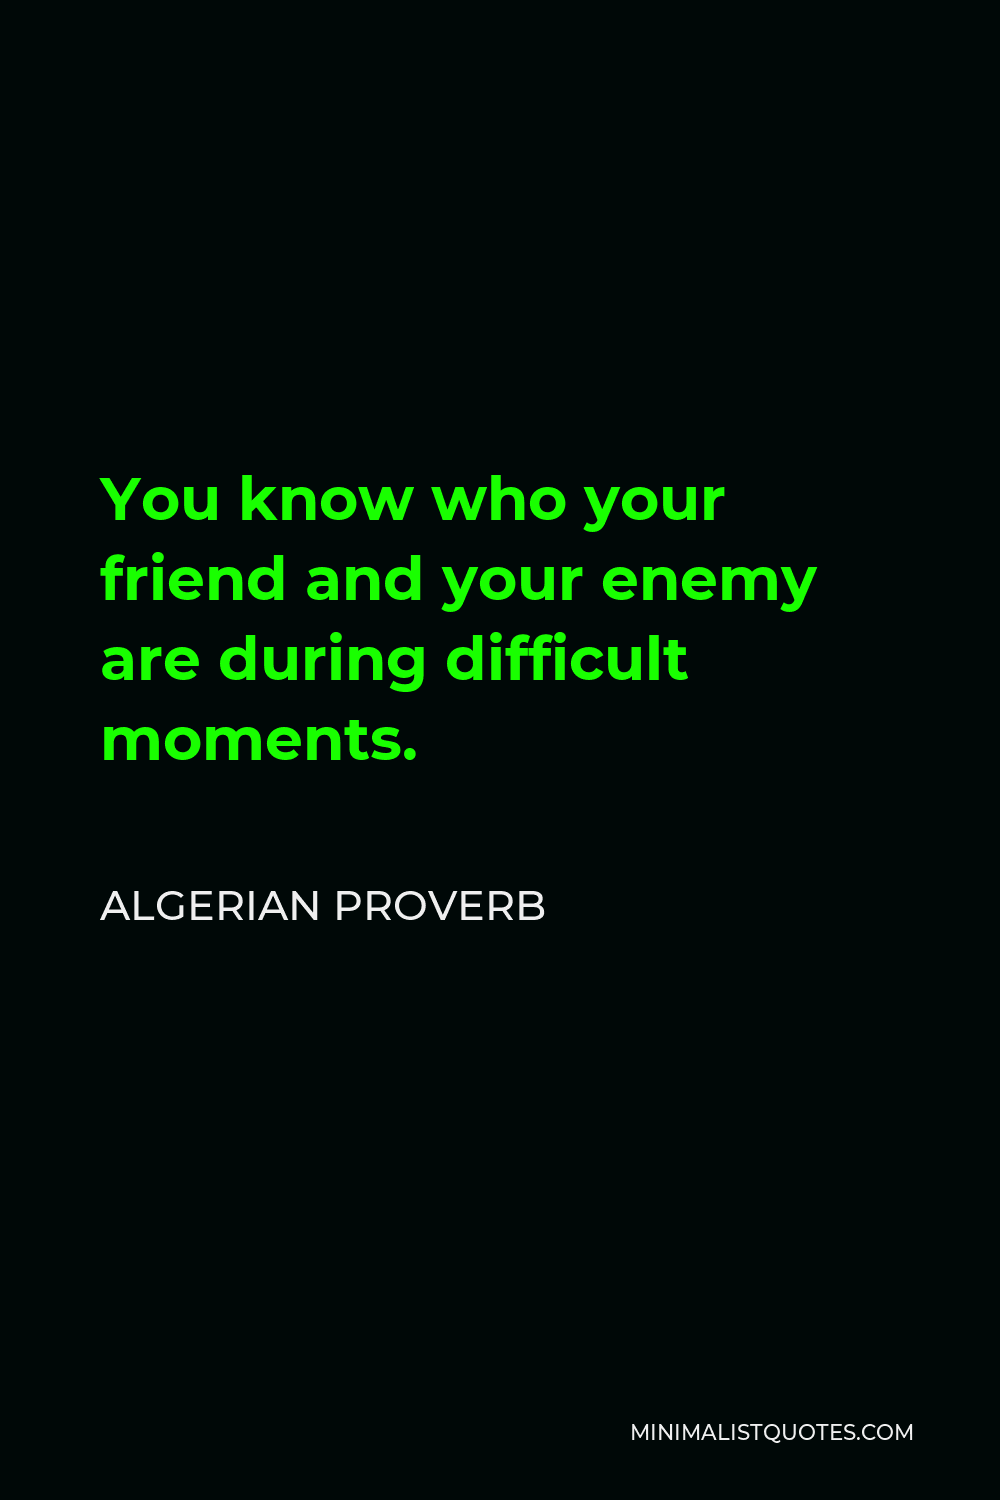 Algerian Proverb Quote - You know who your friend and your enemy are during difficult moments.